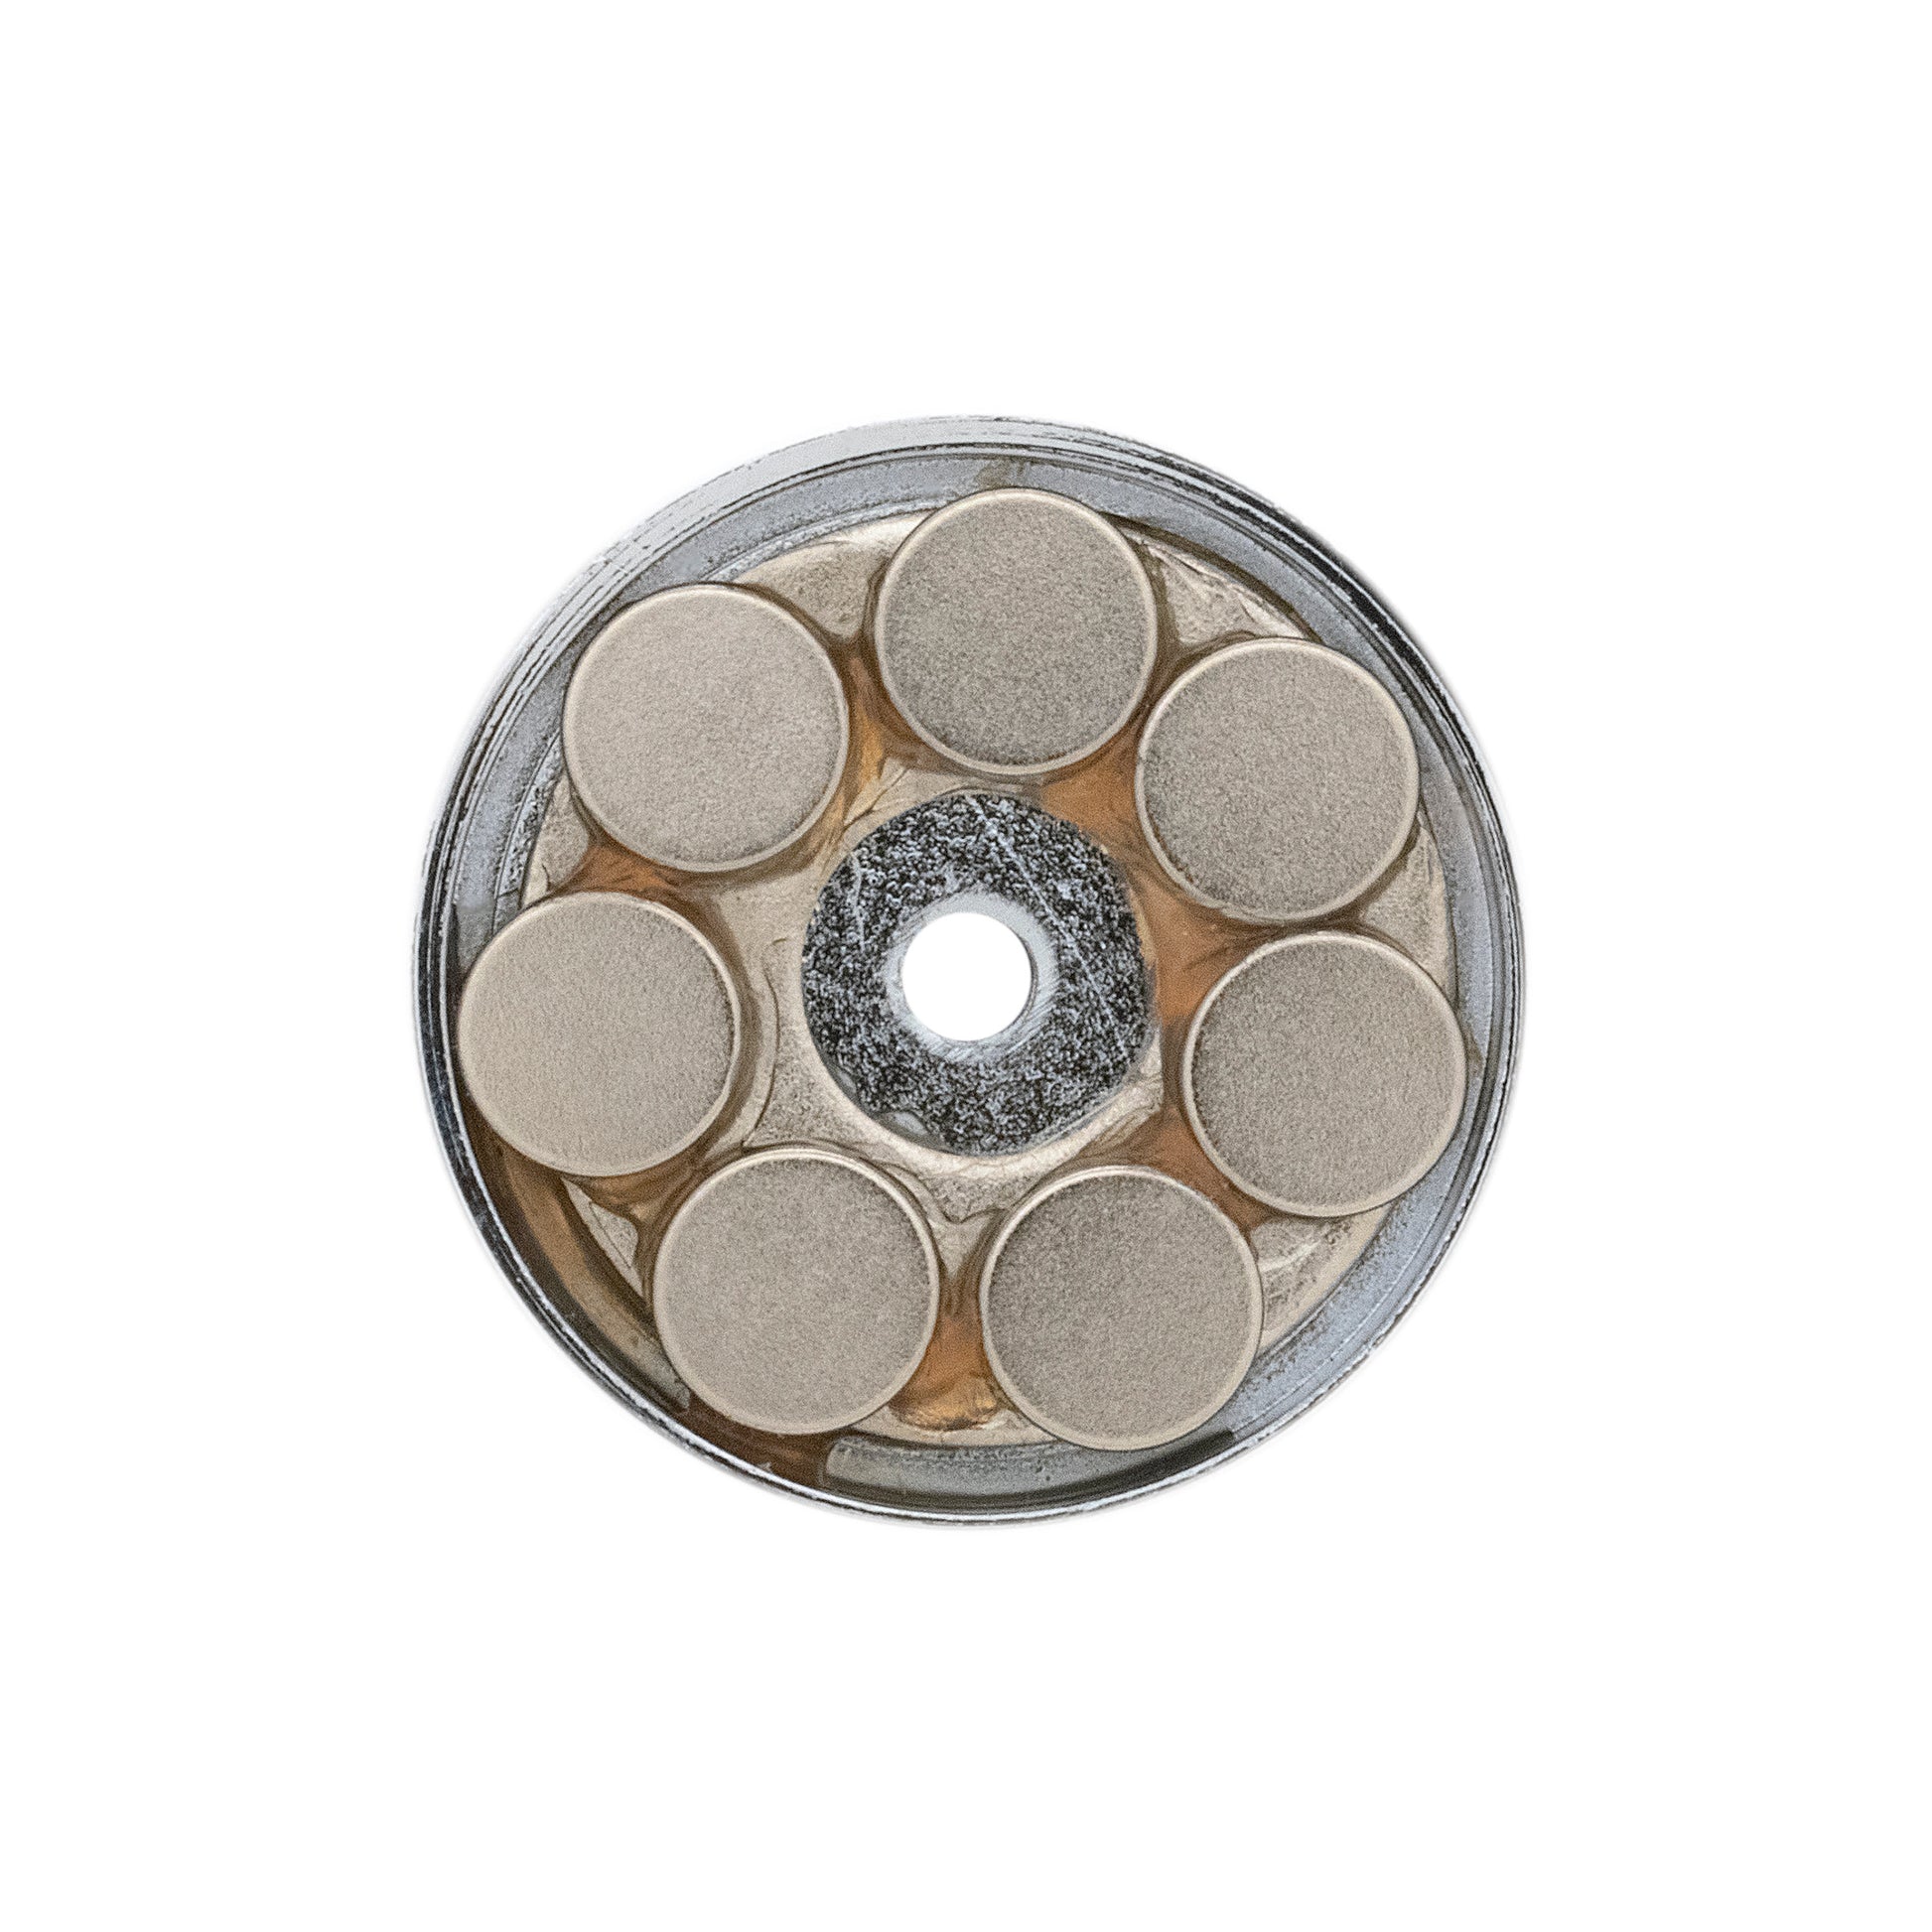 Load image into Gallery viewer, RB20N-NEOBX Neodymium Round Base Magnet - Top View